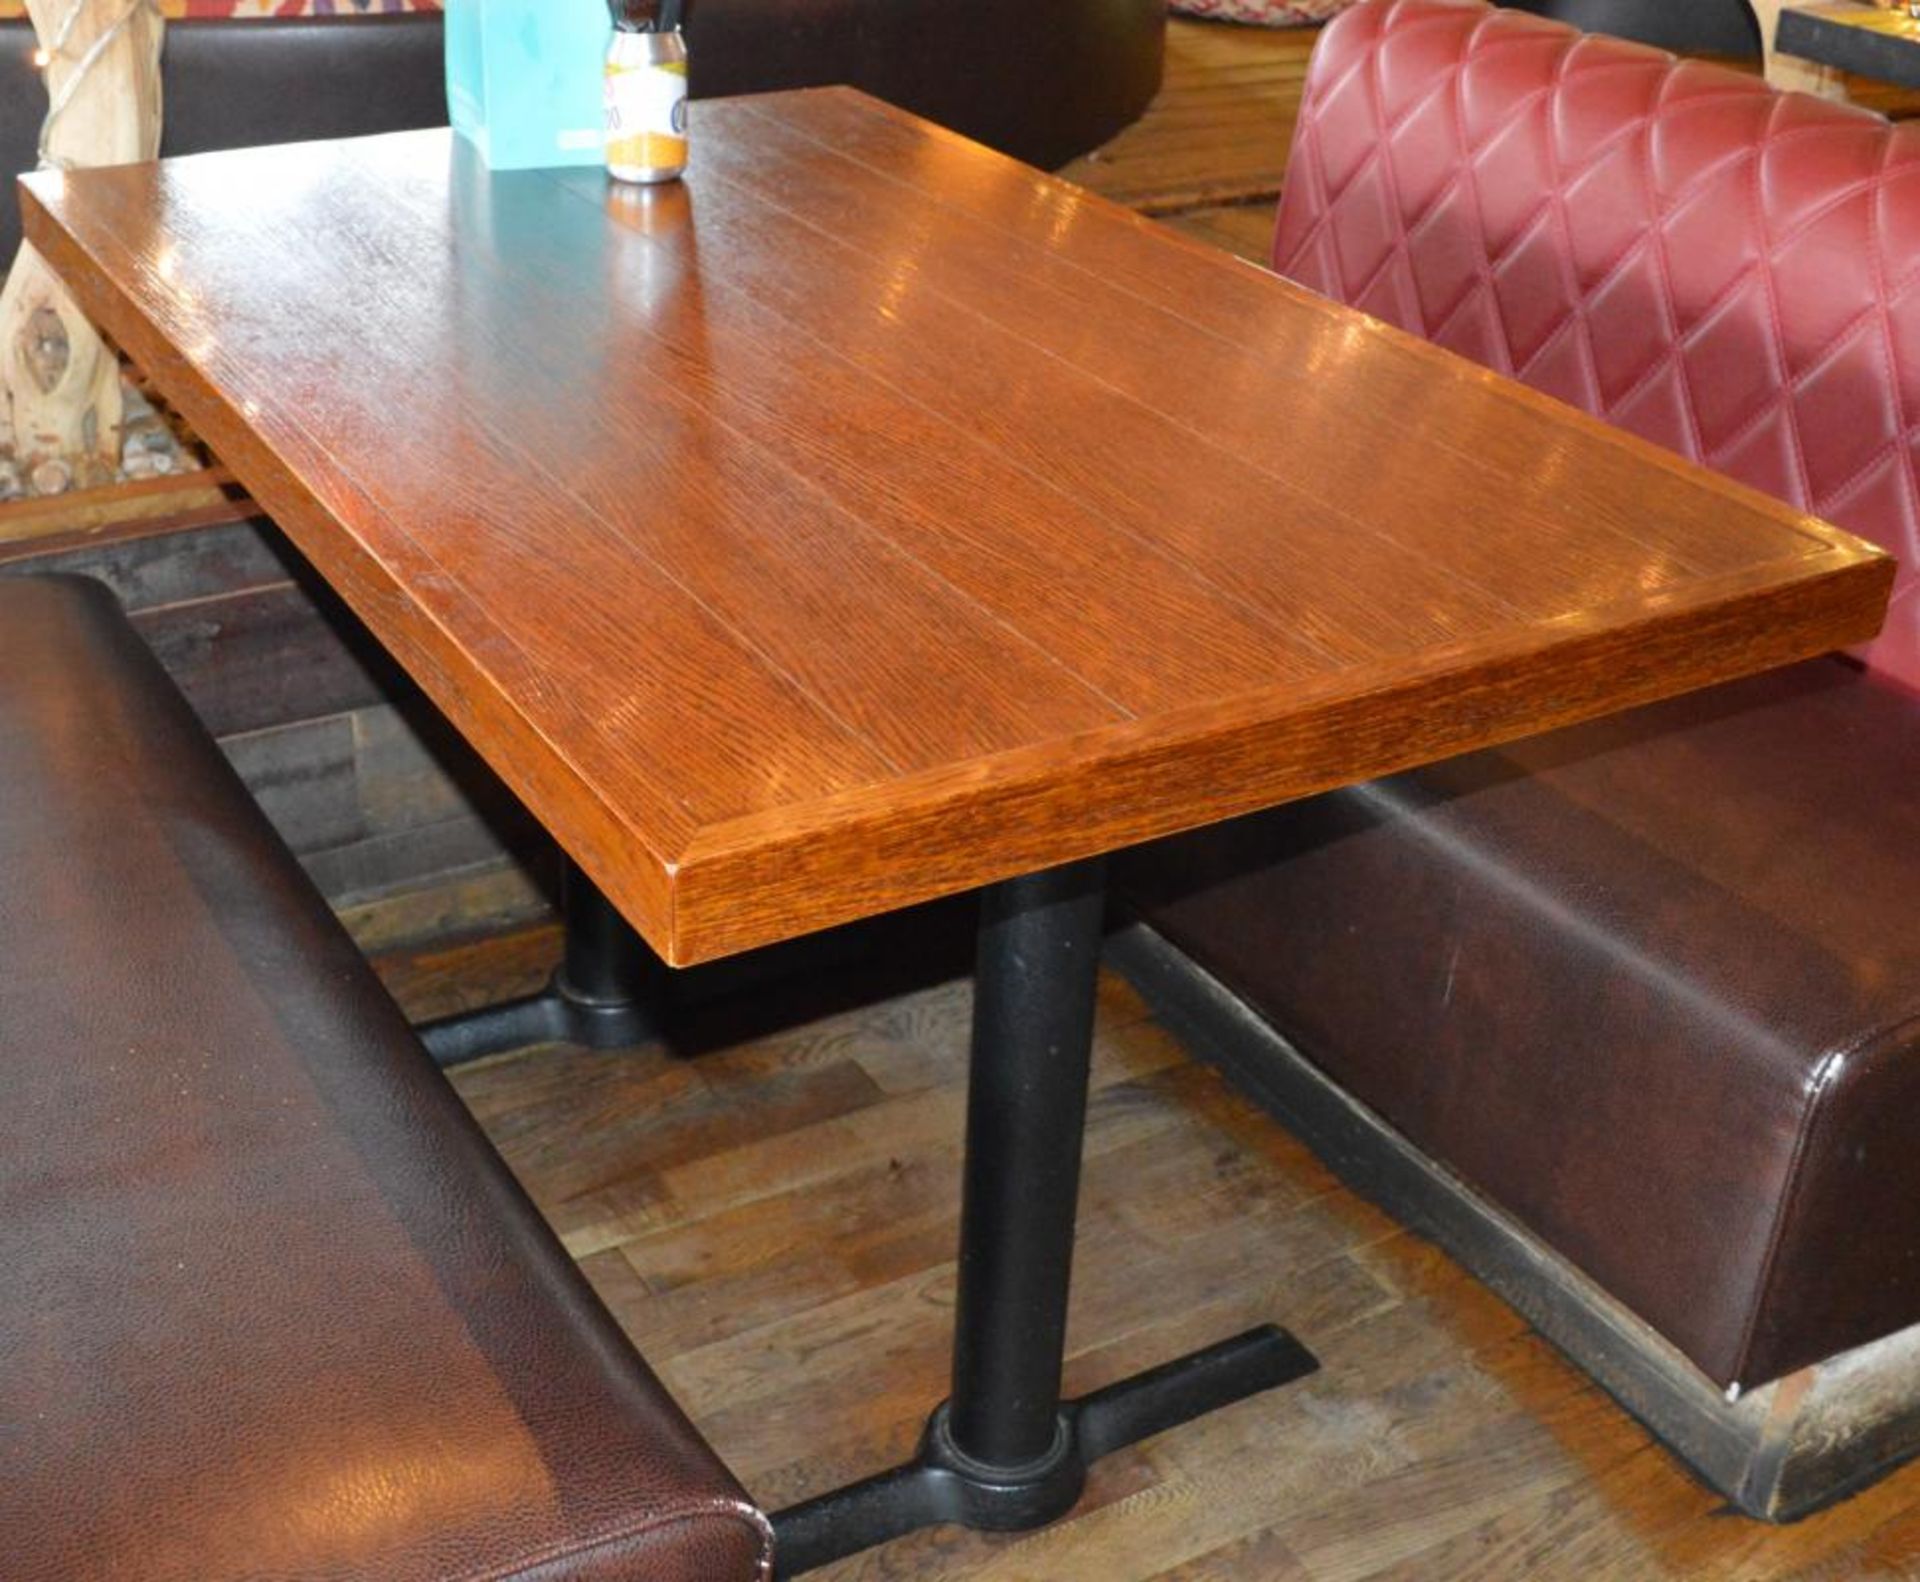 1 x Four Seater Rectangular Restaurant Dining Table With Cast Iron Bases and Wood Panelled Design